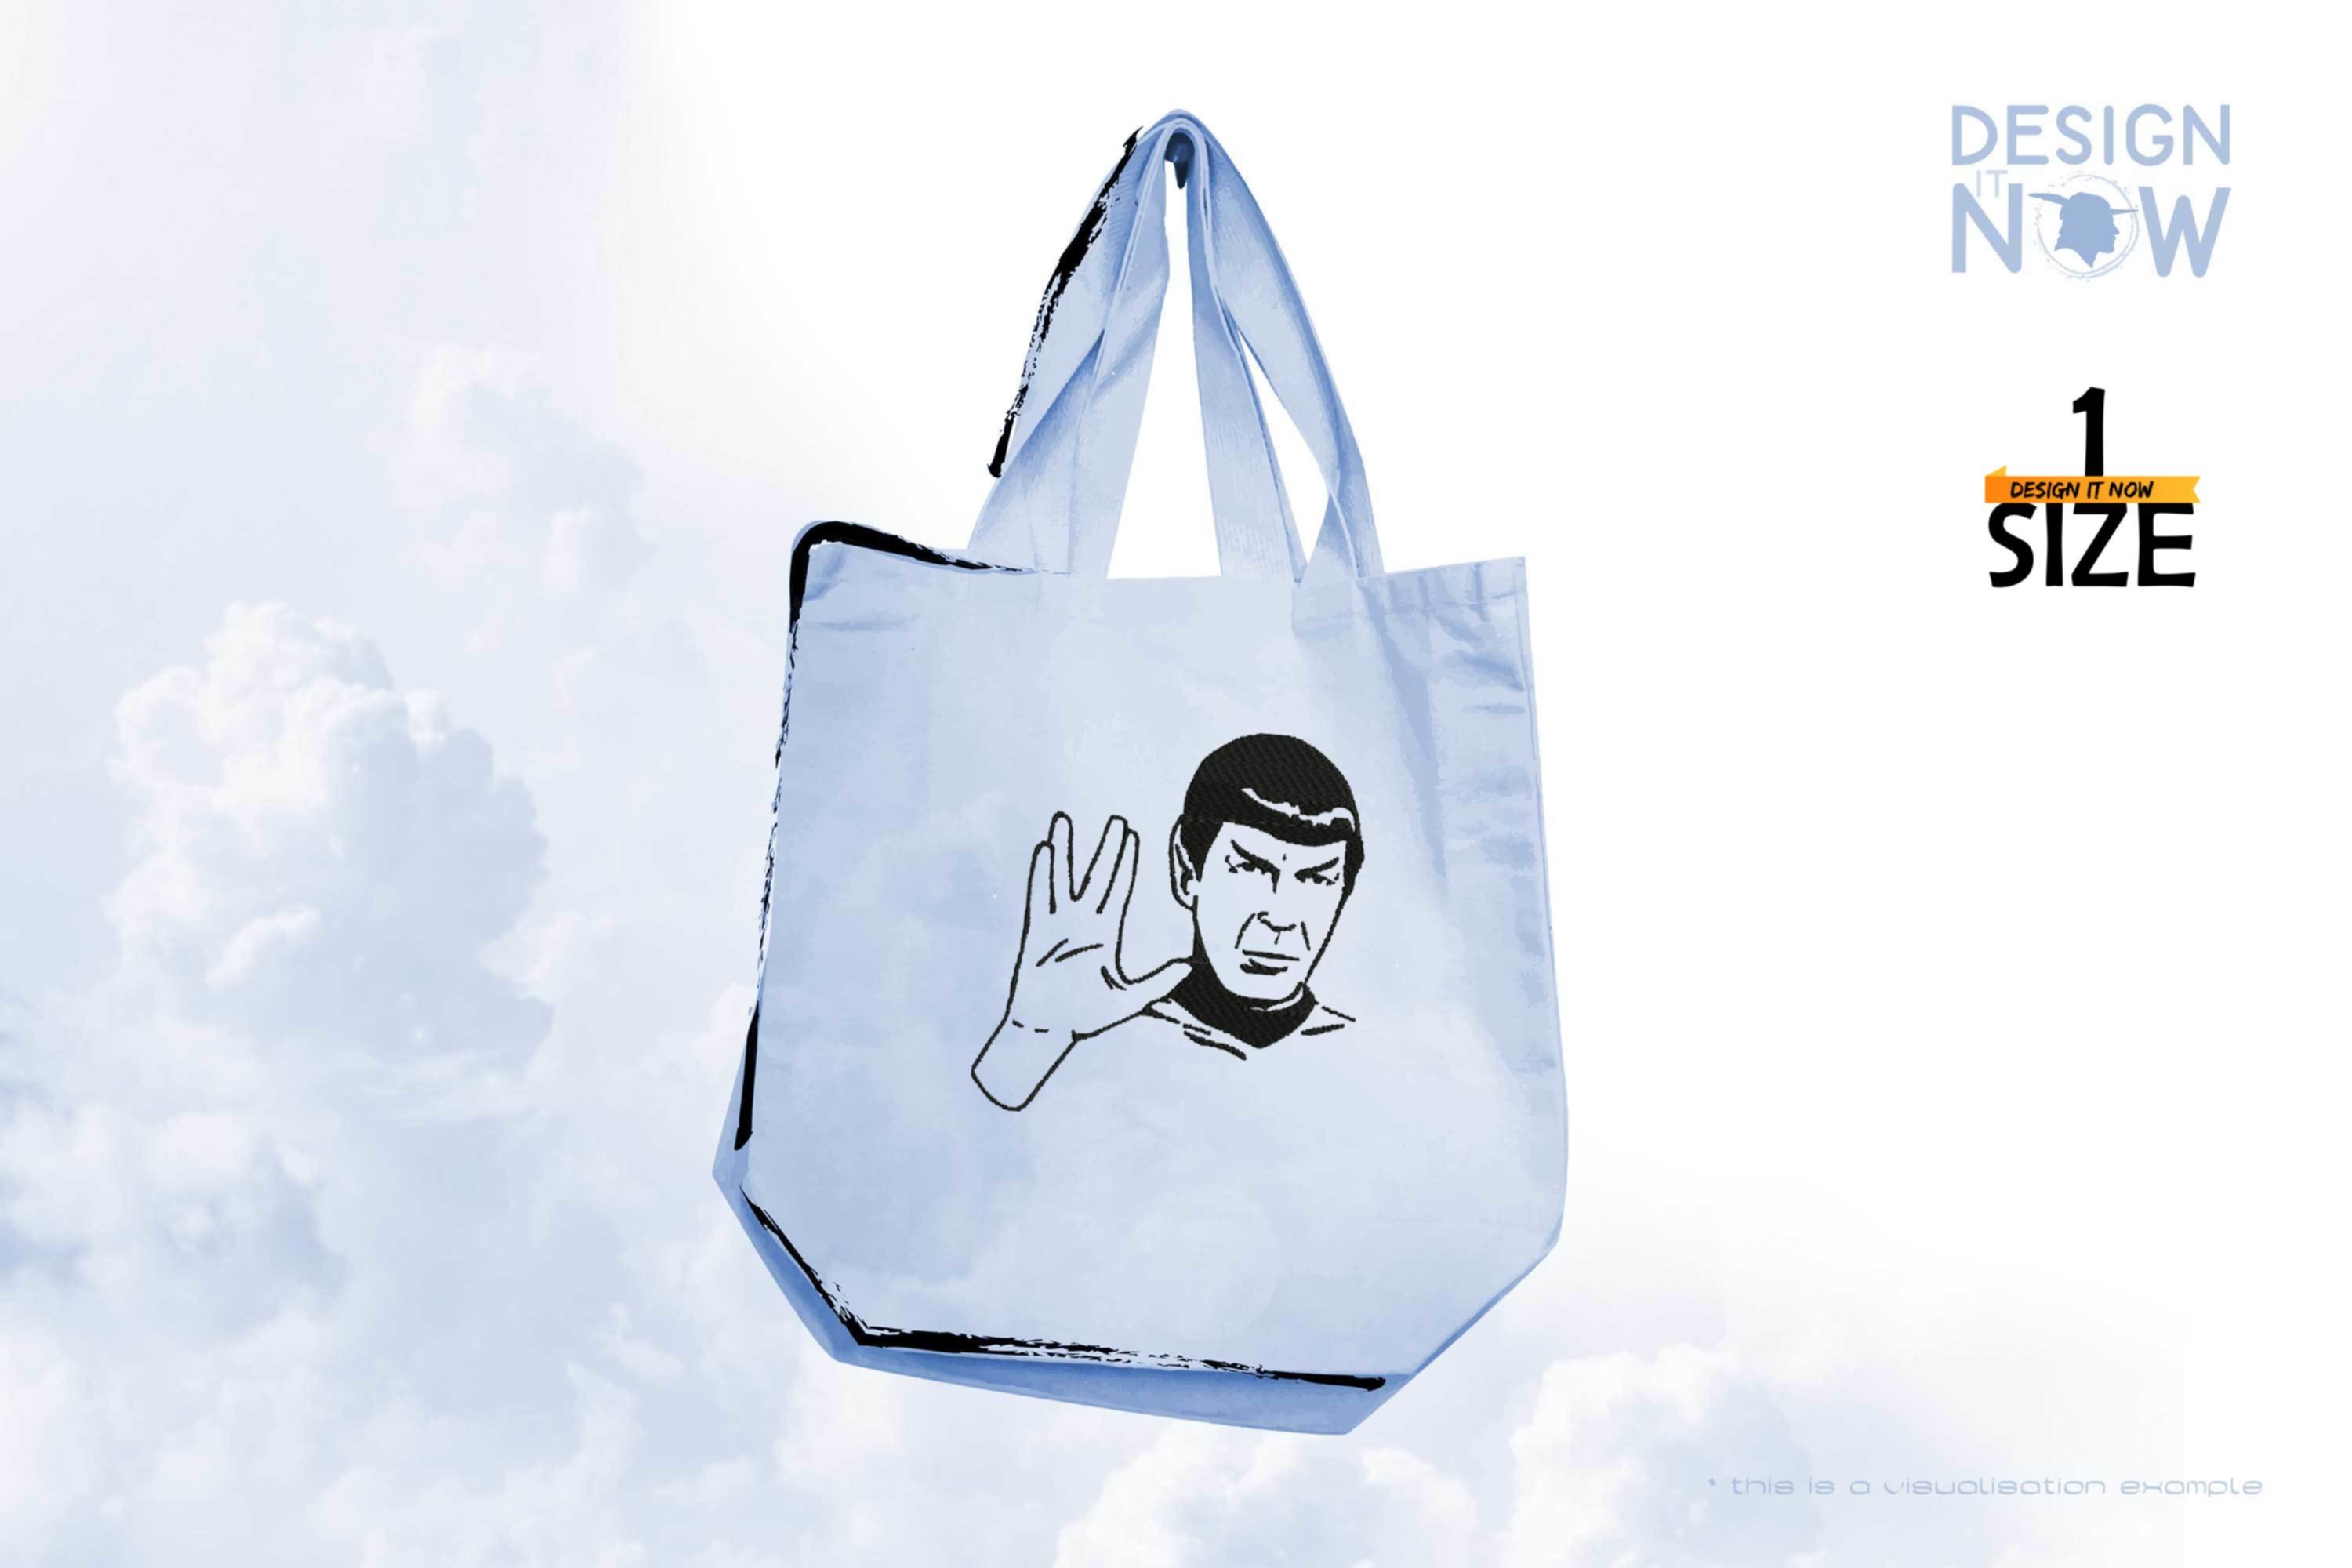 Tribut To Fictional Character Spock aka Spock 